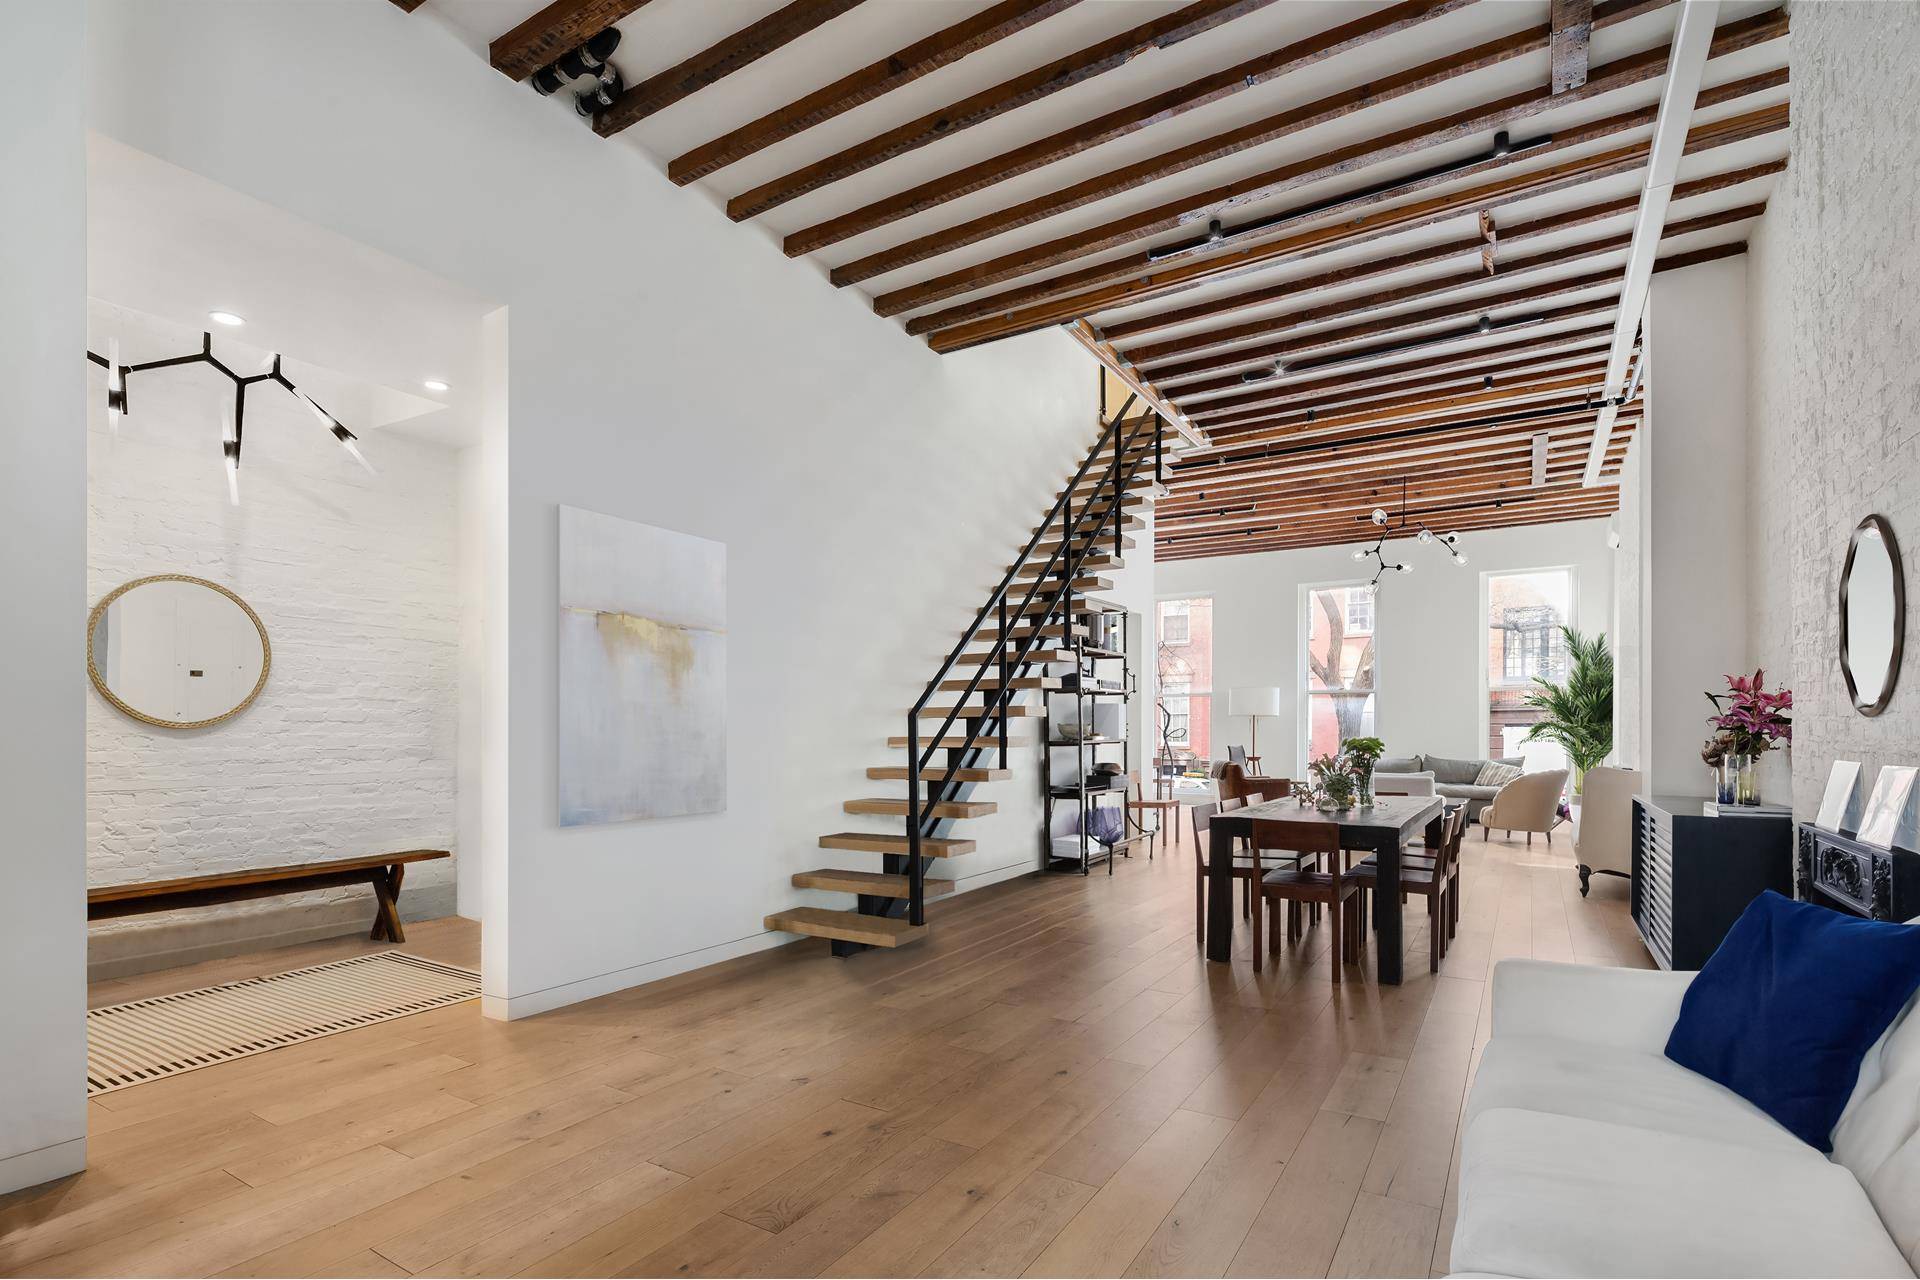 Situated in the heart of the West Village and a block away from Washington Square Park ; this 23' wide, 3000 sqft Duplex spans the 2nd and 3rd floors of ...